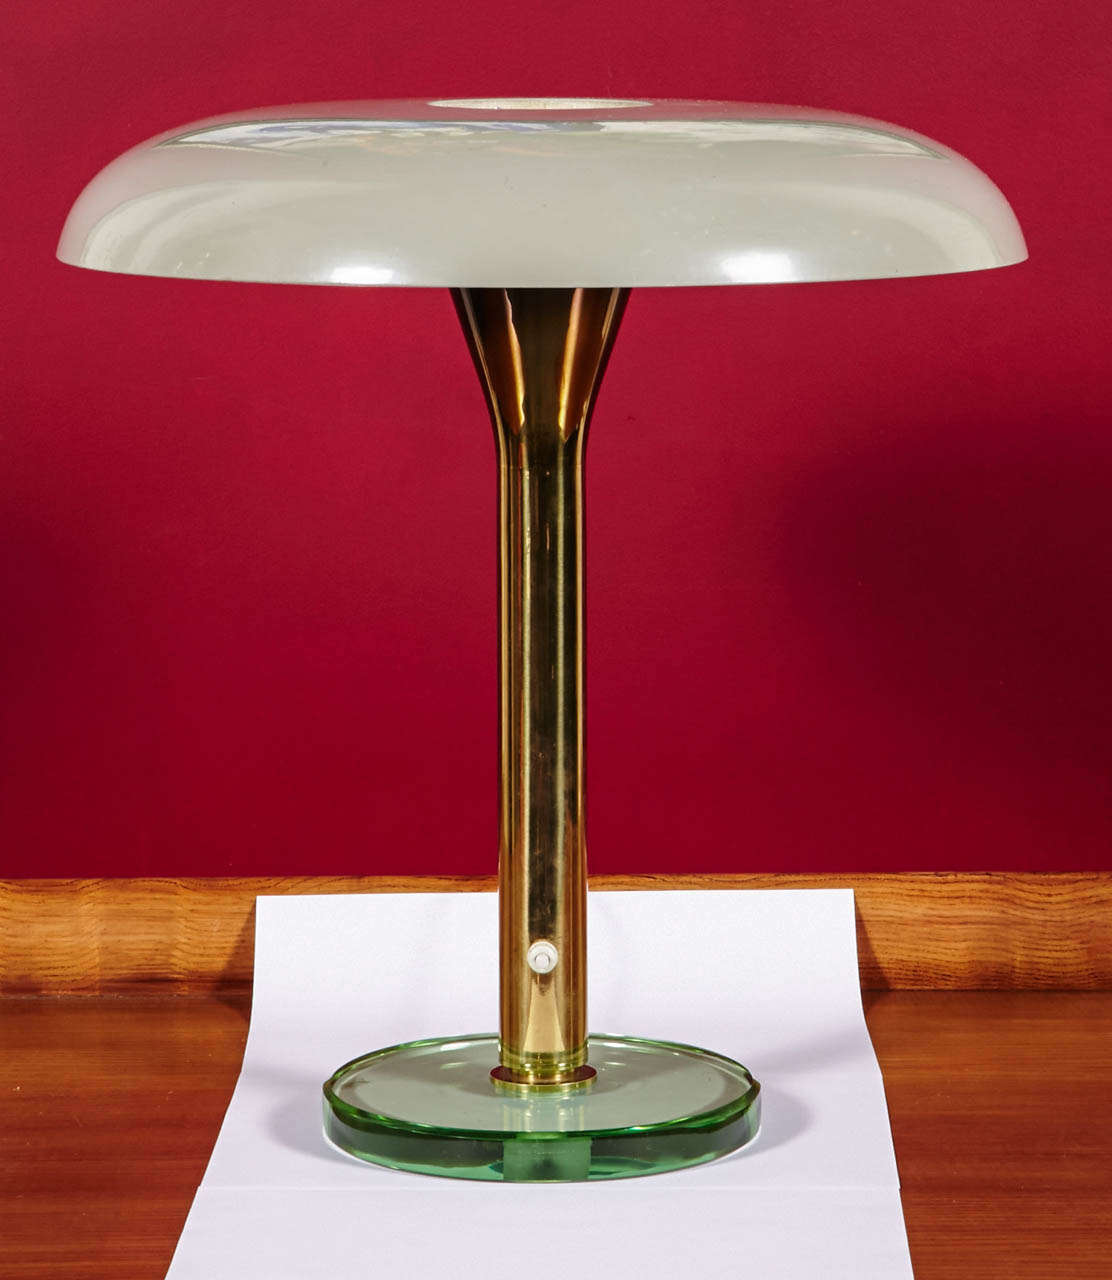 ITALY, circa 1970
Elegant table lamp with brass structure, thick round glass base and grey painted metal shade. 
Height : 47 cm (18.5 inches)
Diam : 45 cm (17.7 inches)
Good condition